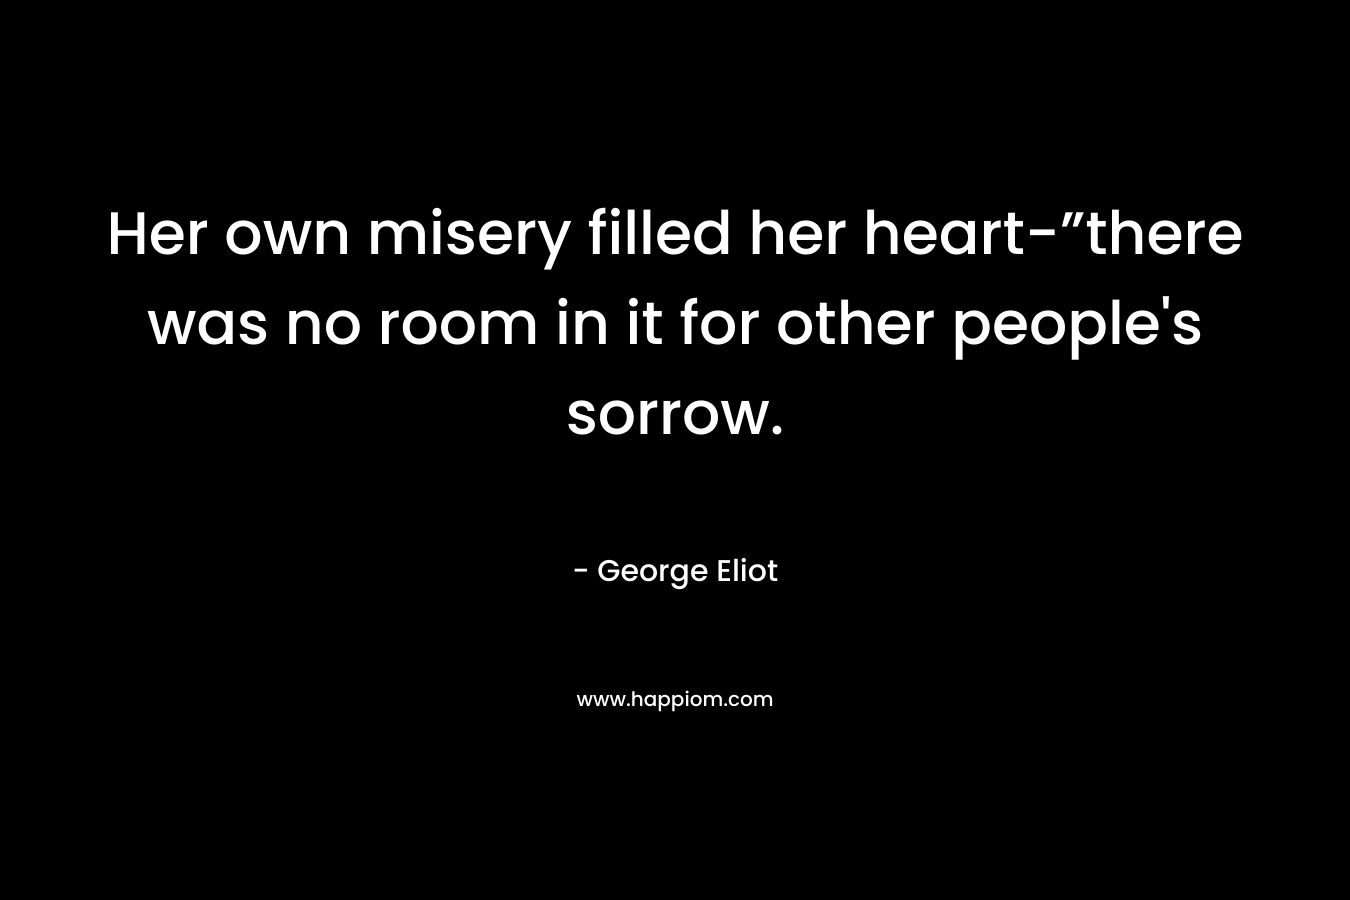 Her own misery filled her heart-”there was no room in it for other people’s sorrow. – George Eliot